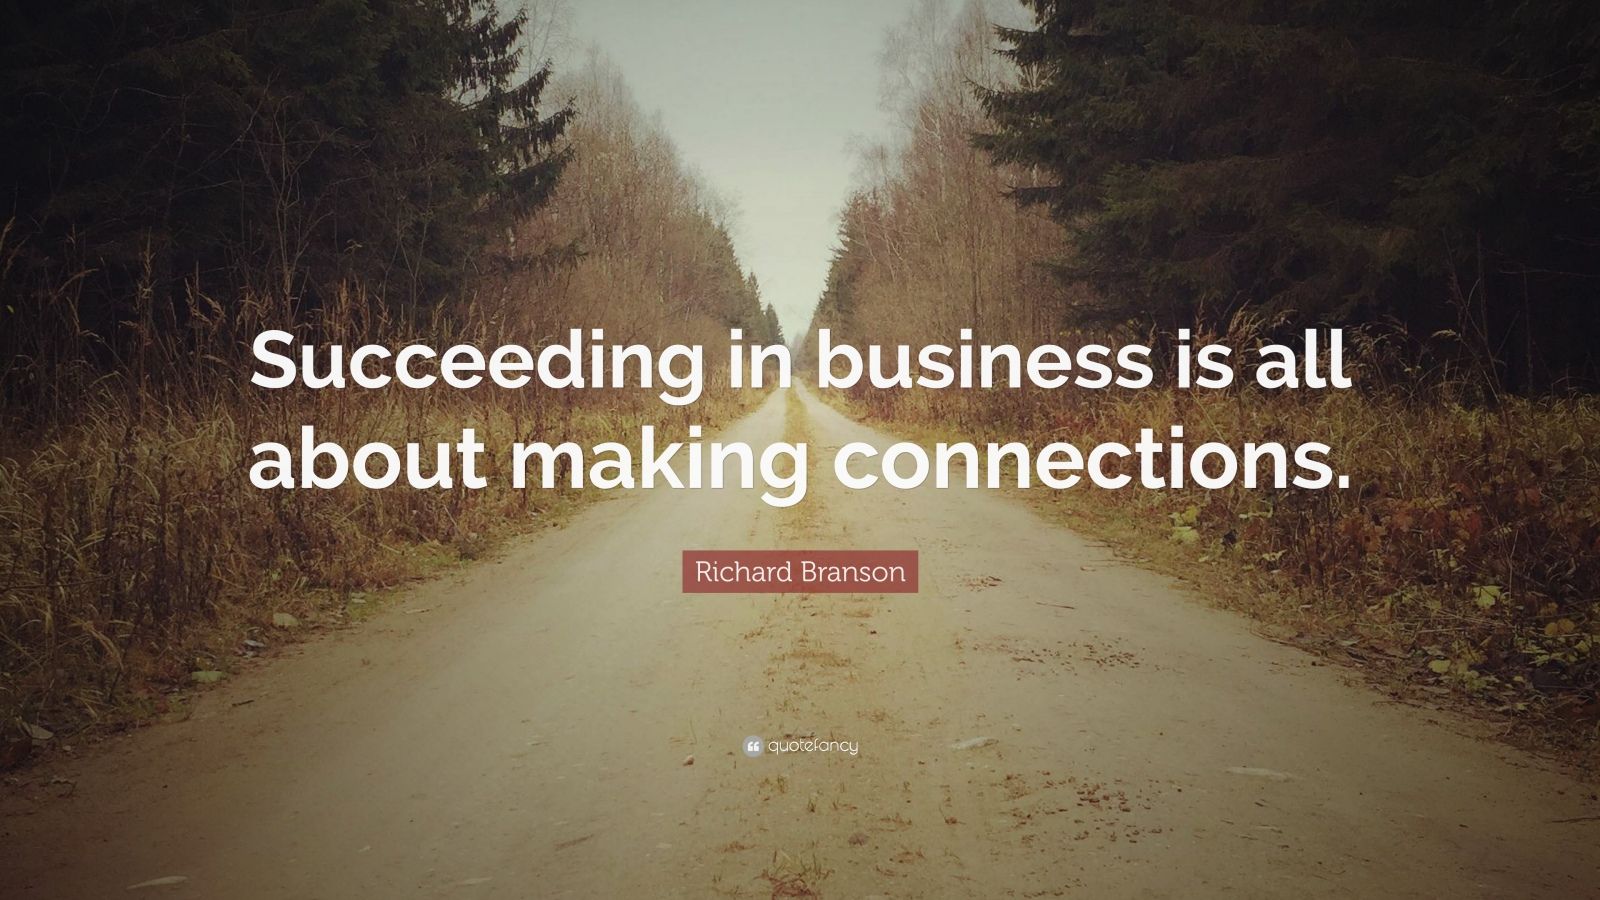 Richard Branson Quote: “Succeeding in business is all about making